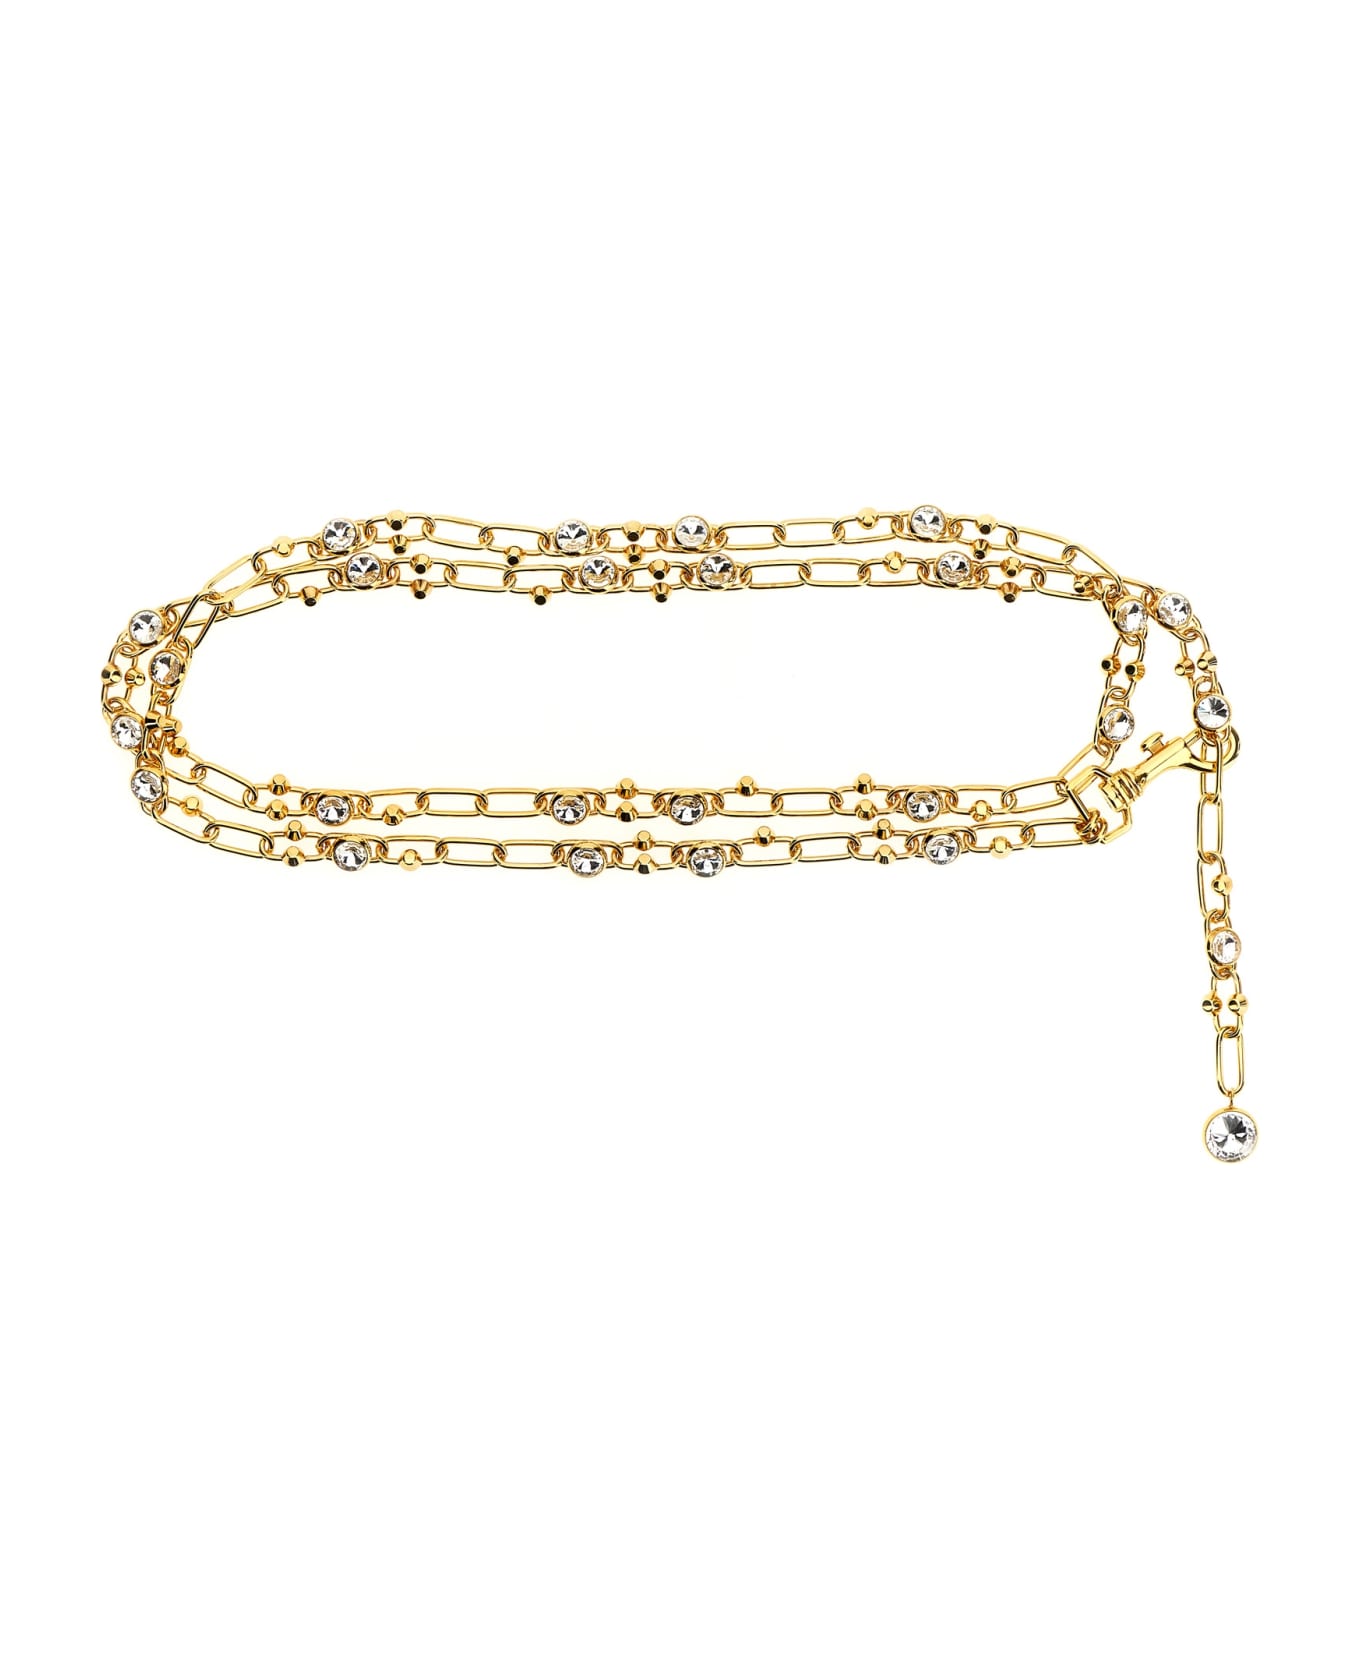 Alessandra Rich Chain And Crystal Belt - Gold